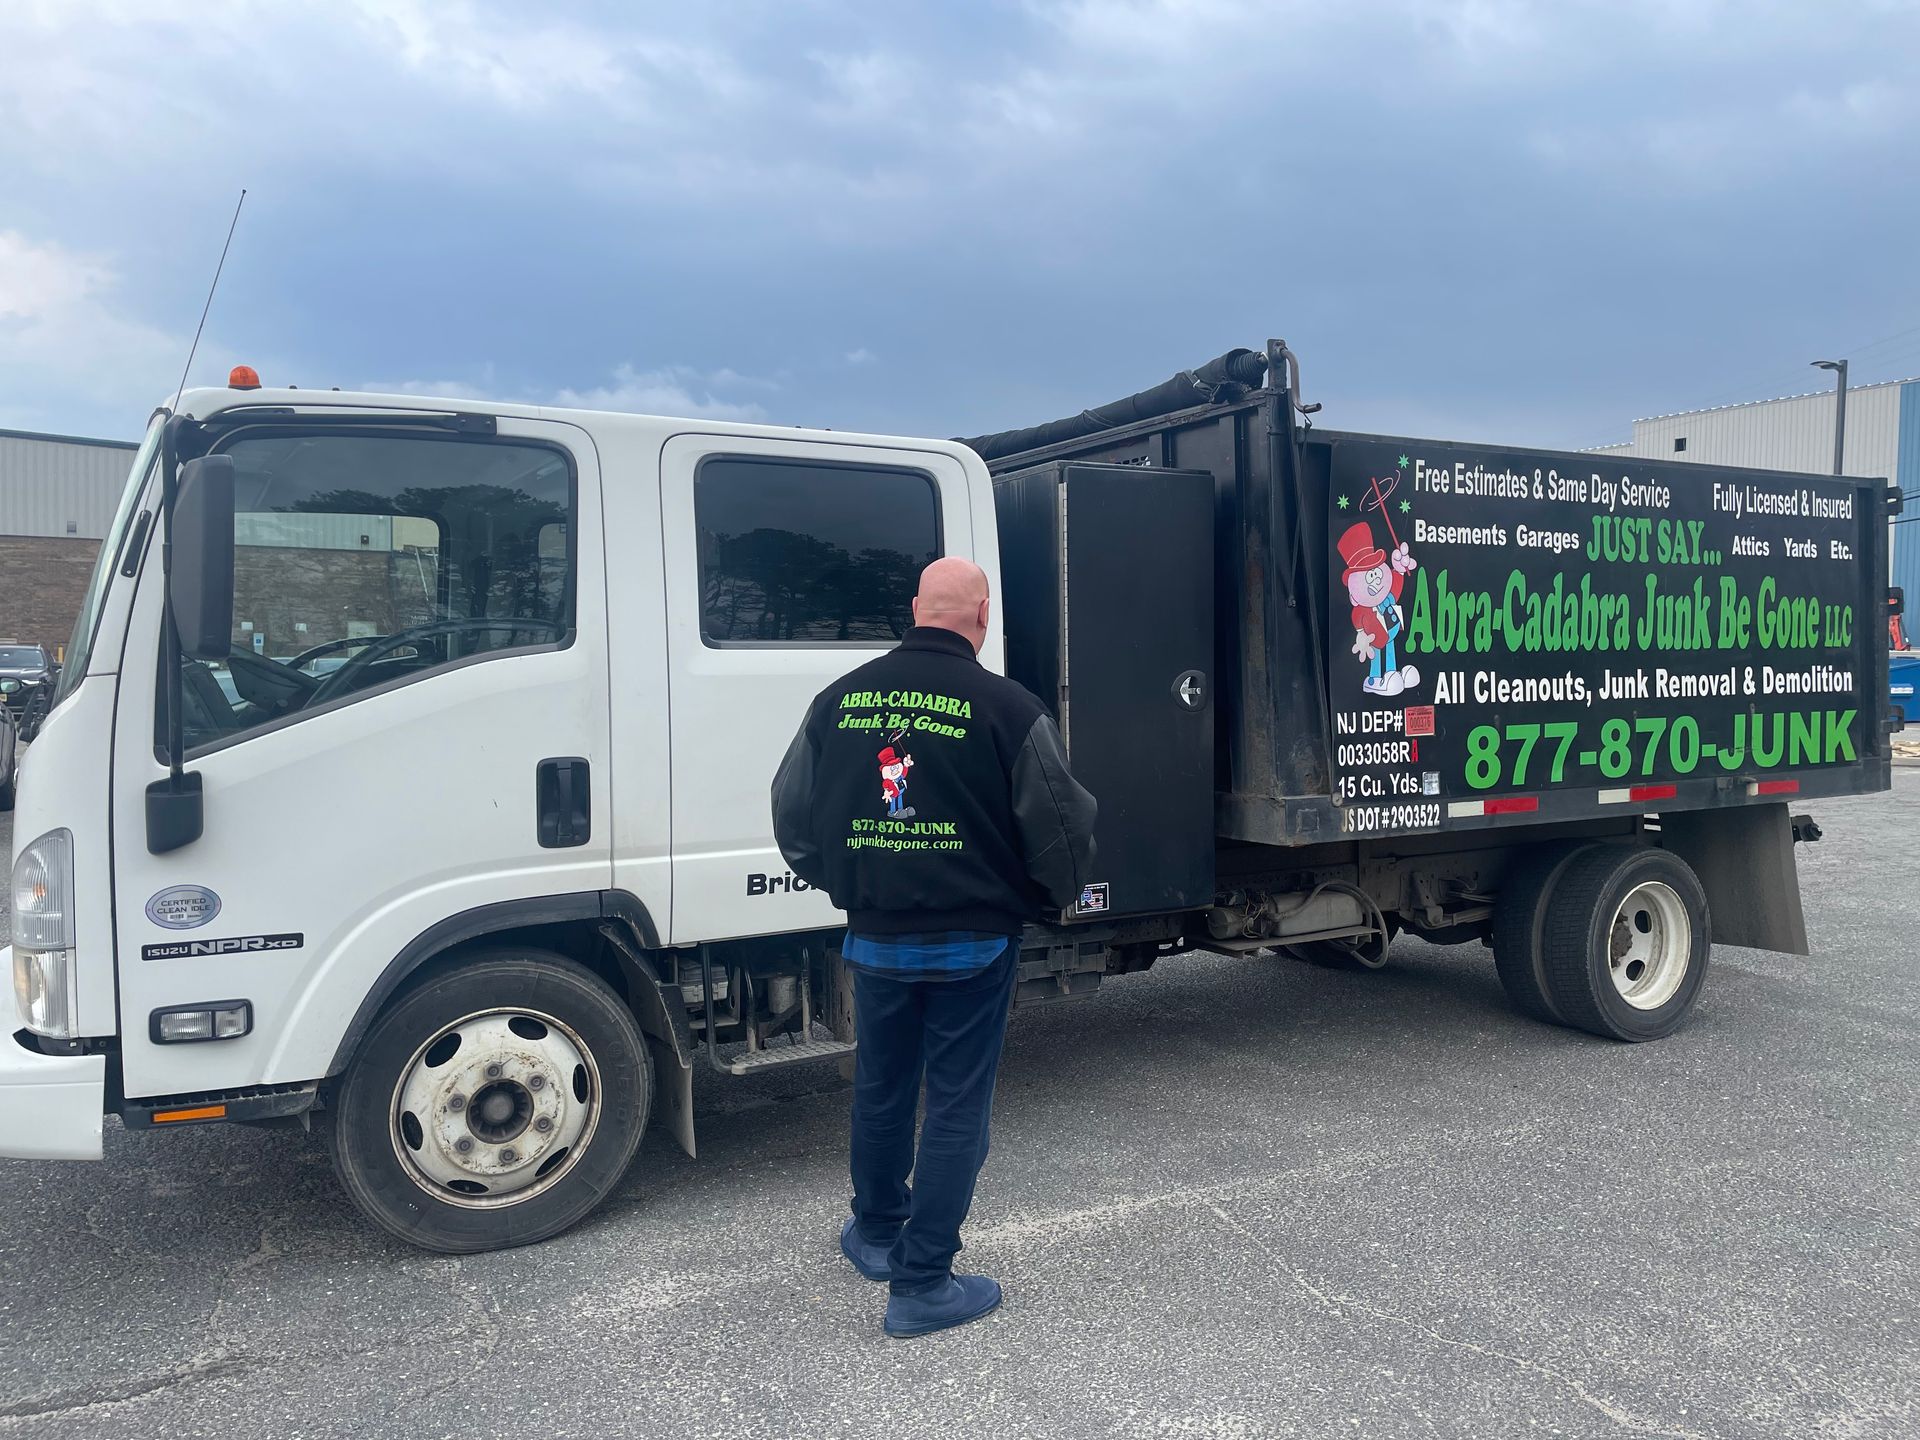 Top Junk removal Company in Toms River